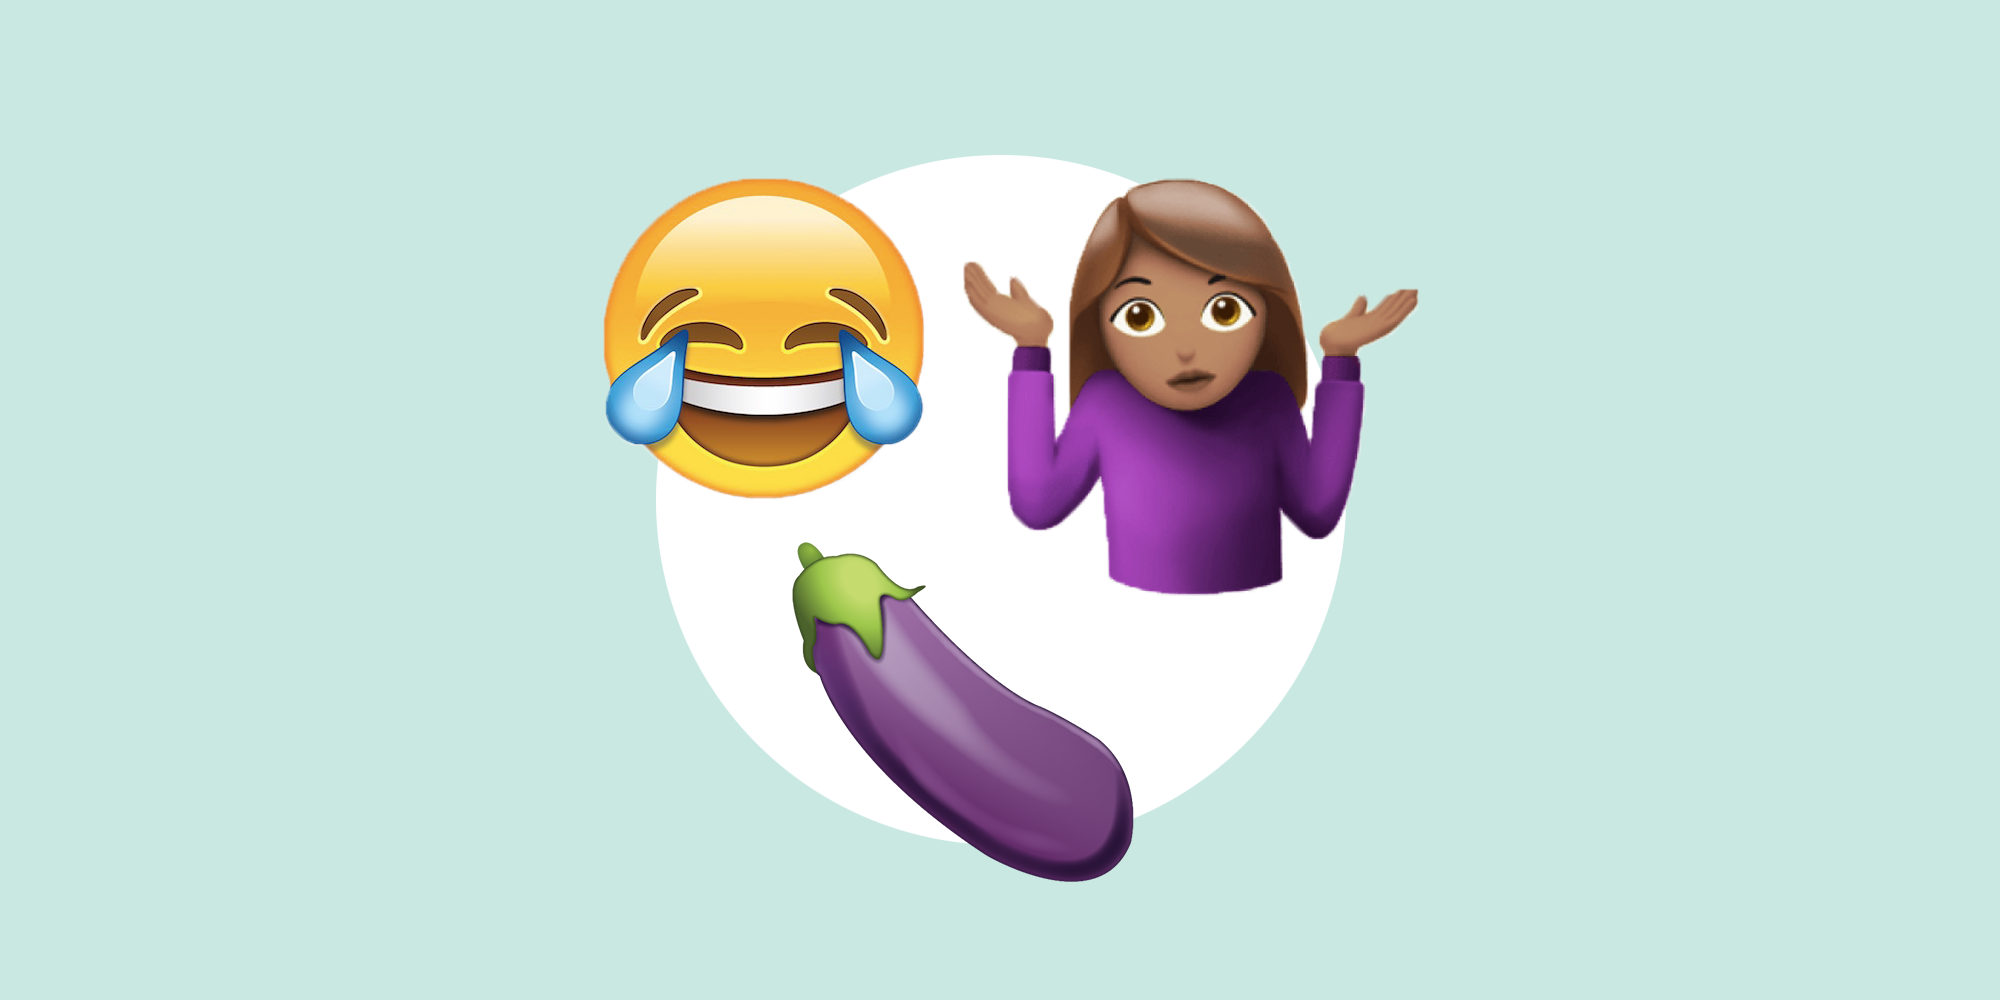 50 best emoji quiz questions for your next game night